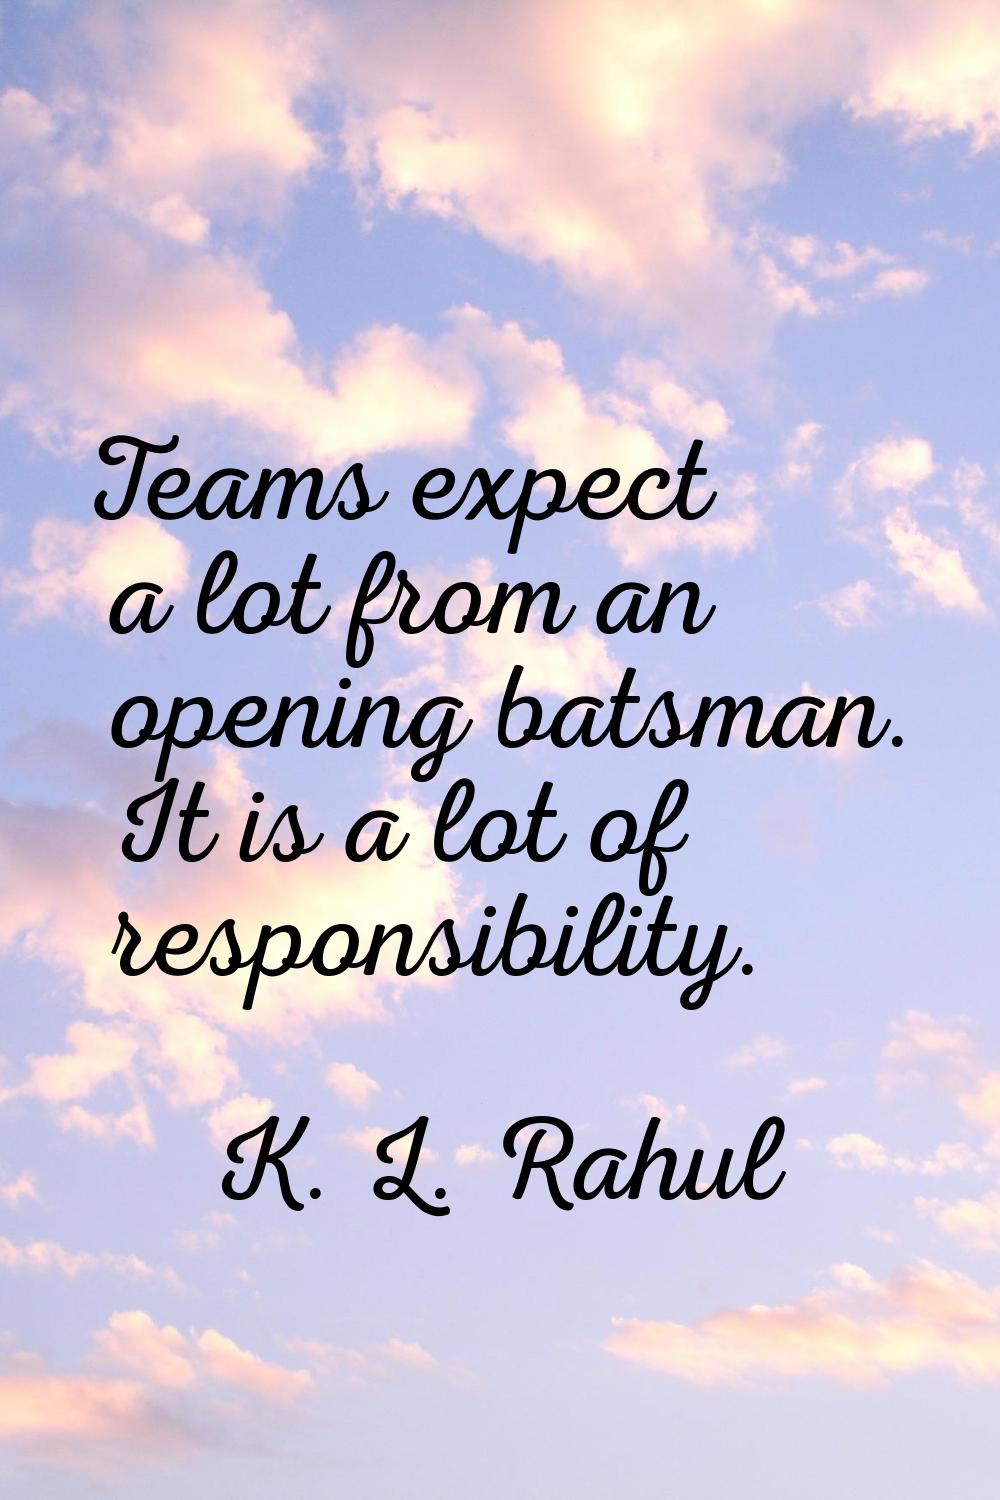 Teams expect a lot from an opening batsman. It is a lot of responsibility.